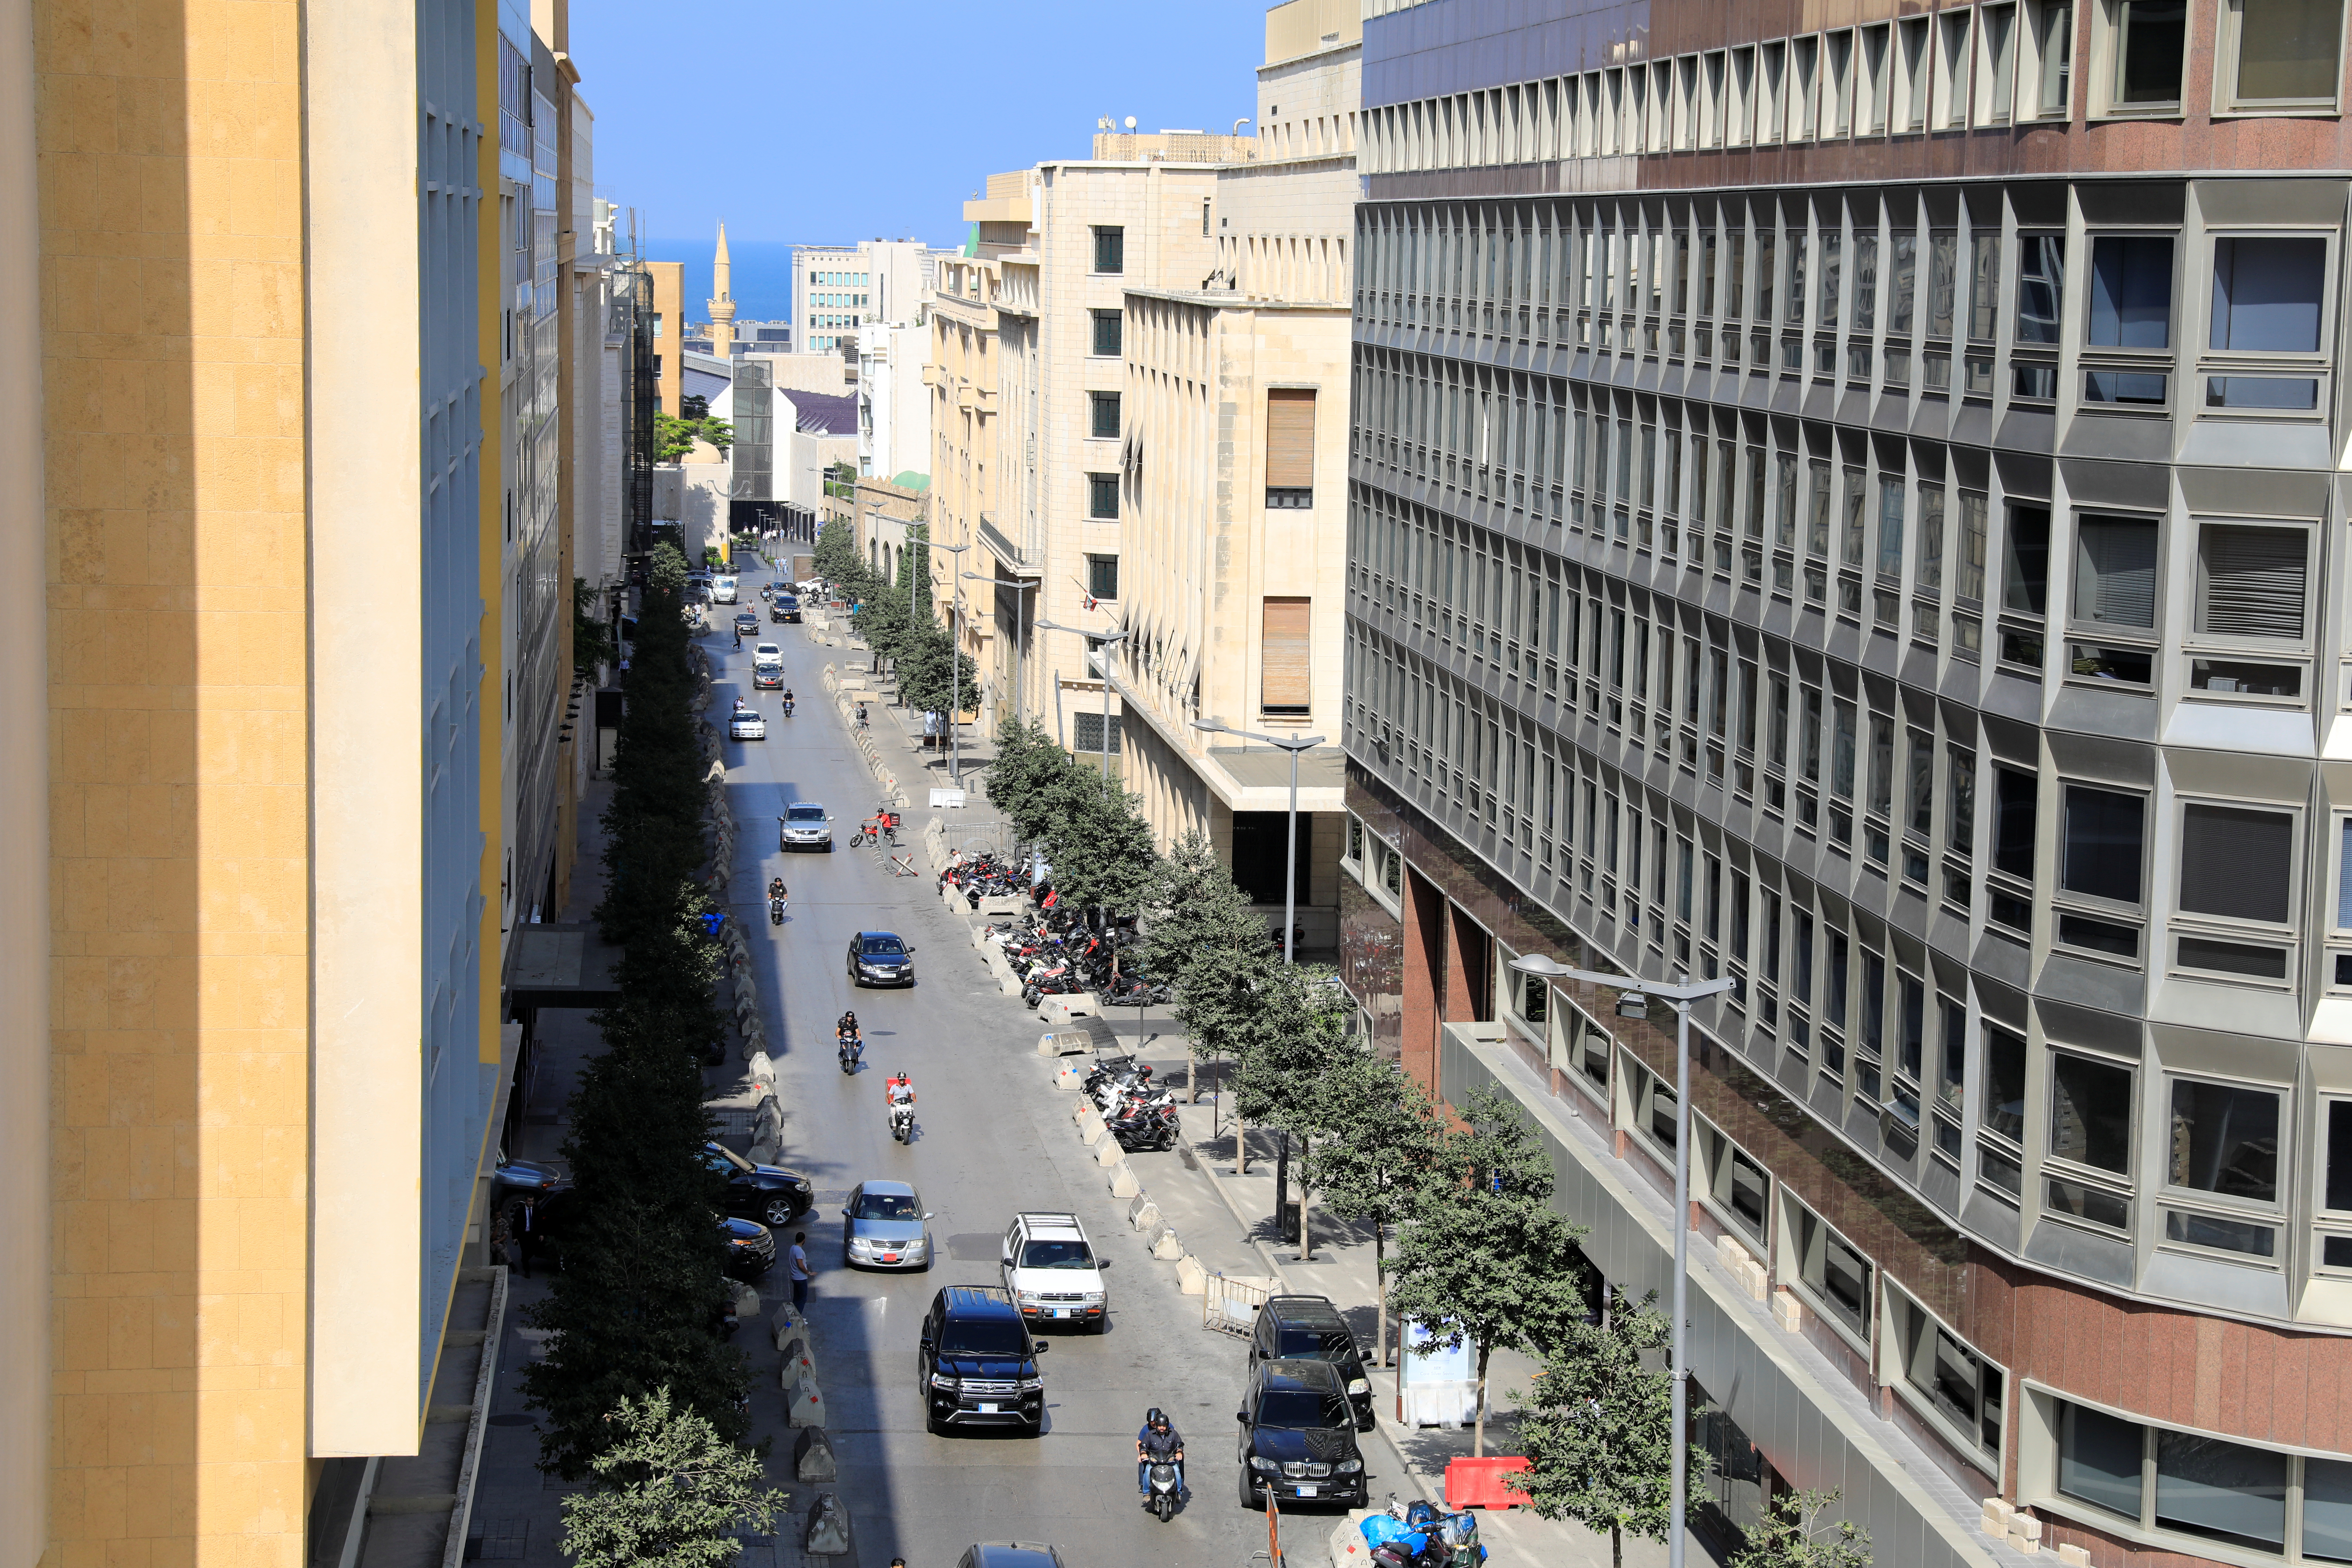 A general view shows a street hosting banks and financial institutions, known as Banks Street, in Beirut Central District